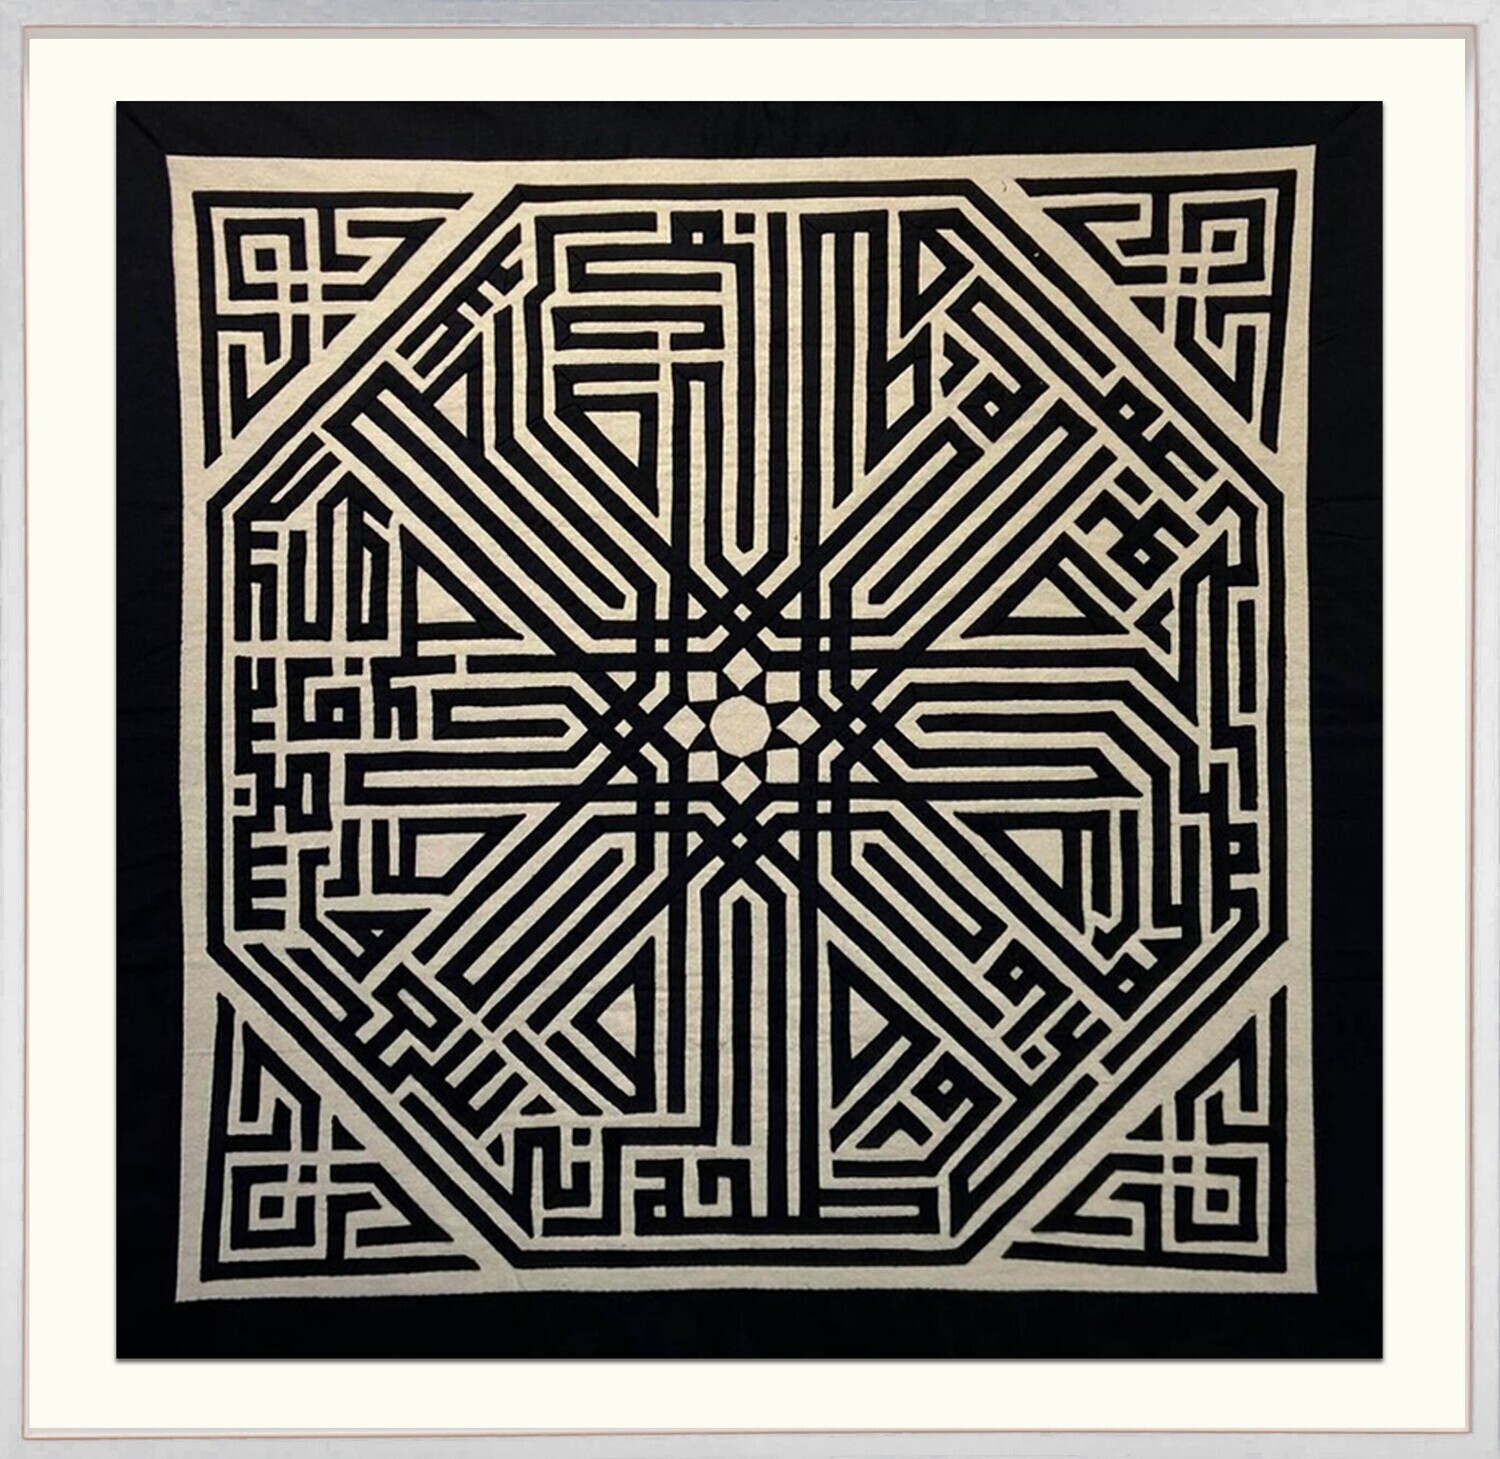 The Ten Given Glad Tidings of Paradise Kufic Applique Hand-Stitched Appliqué Mount Black Museum Frame